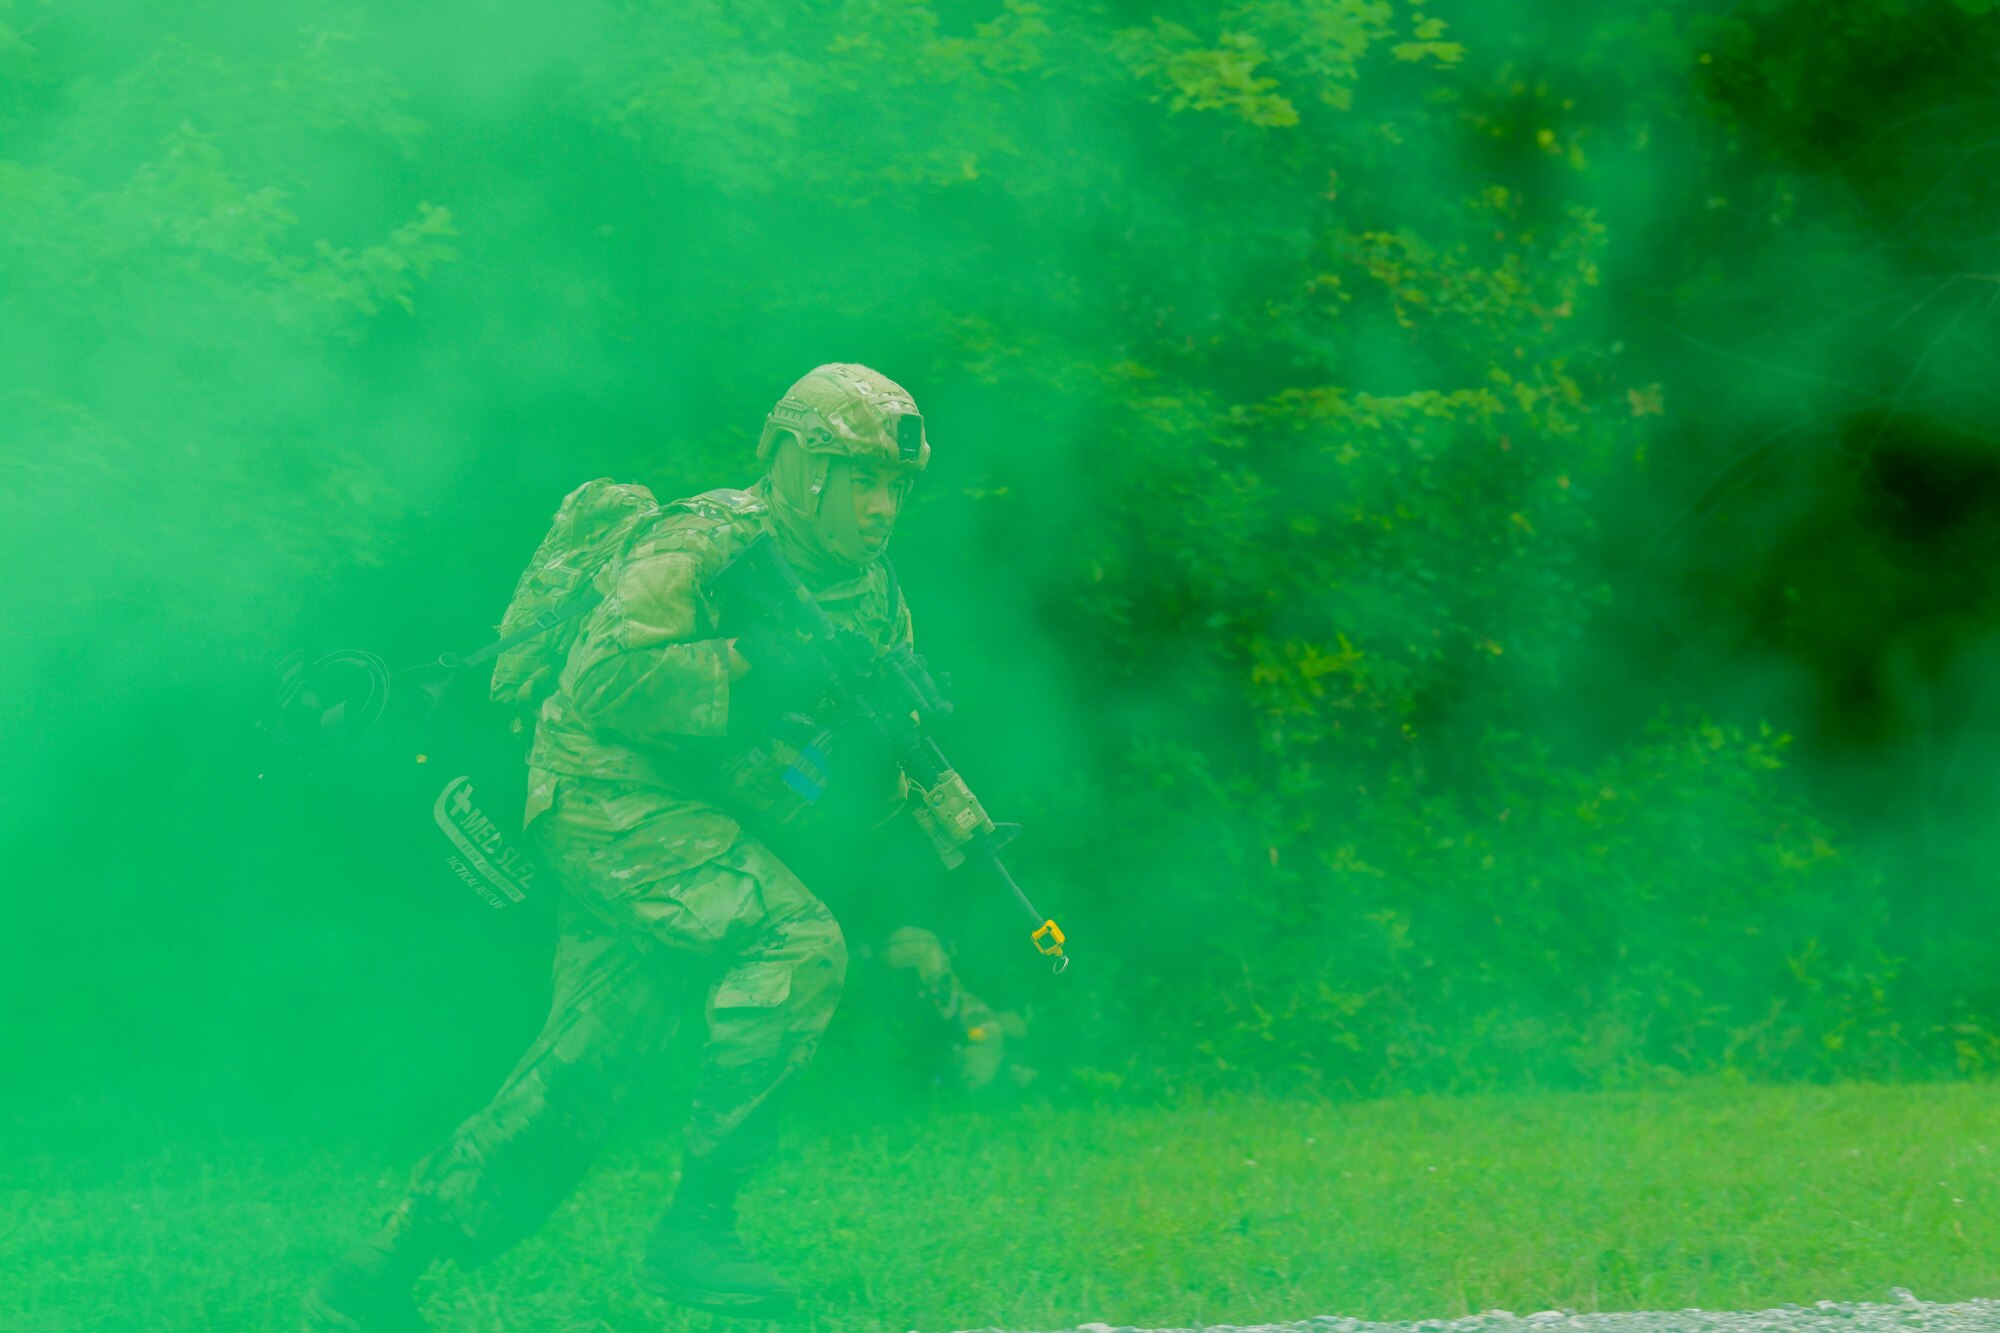 Airman 1st Class Lee Frazier, an Integrated Defense Leadership Course student assigned to the 94th Security Forces Squadron, Dobbins Air Reserve Base, Georgia, moves through smoke cover during an area security operations exercise at Camp James A. Garfield Joint Military Training Center, Ohio, July 27, 2022.